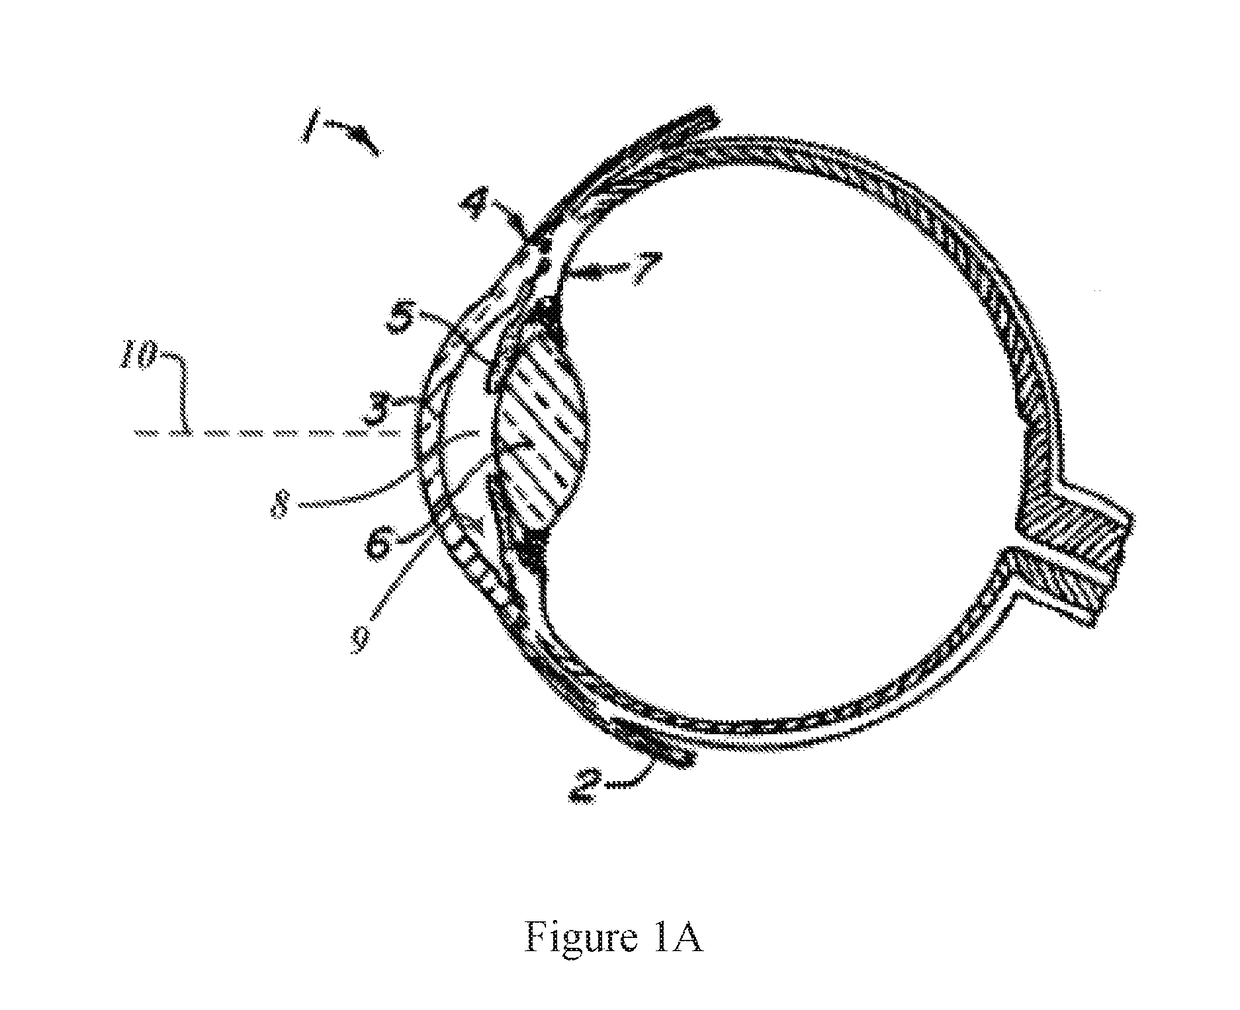 Convex contact probe for the delivery of laser energy